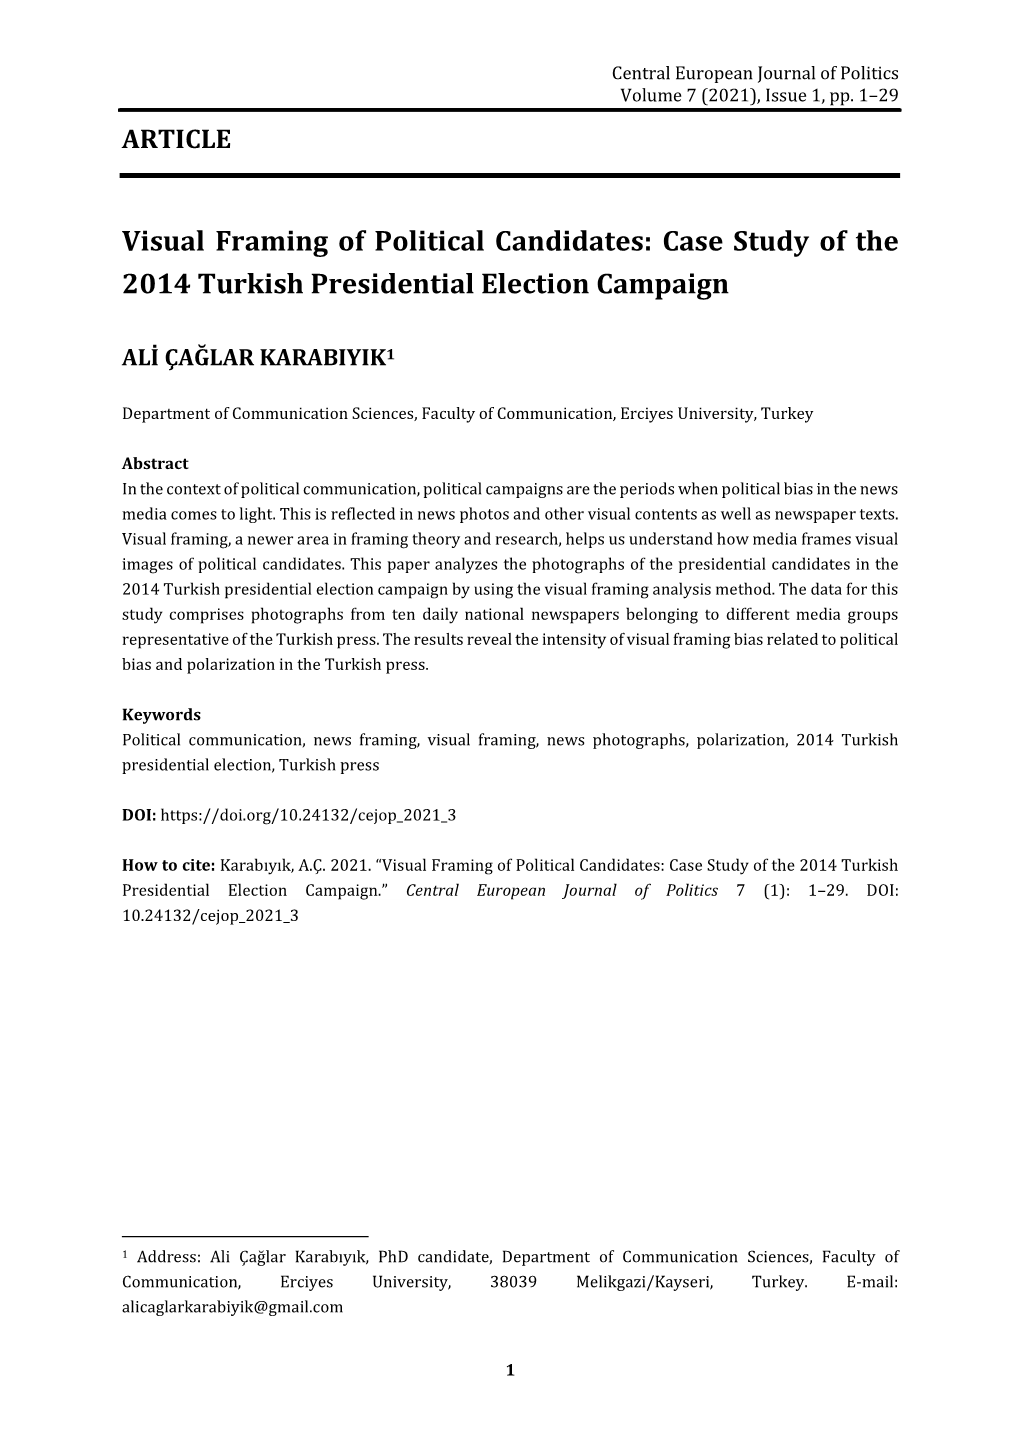 Visual Framing of Political Candidates: Case Study of the 2014 Turkish Presidential Election Campaign